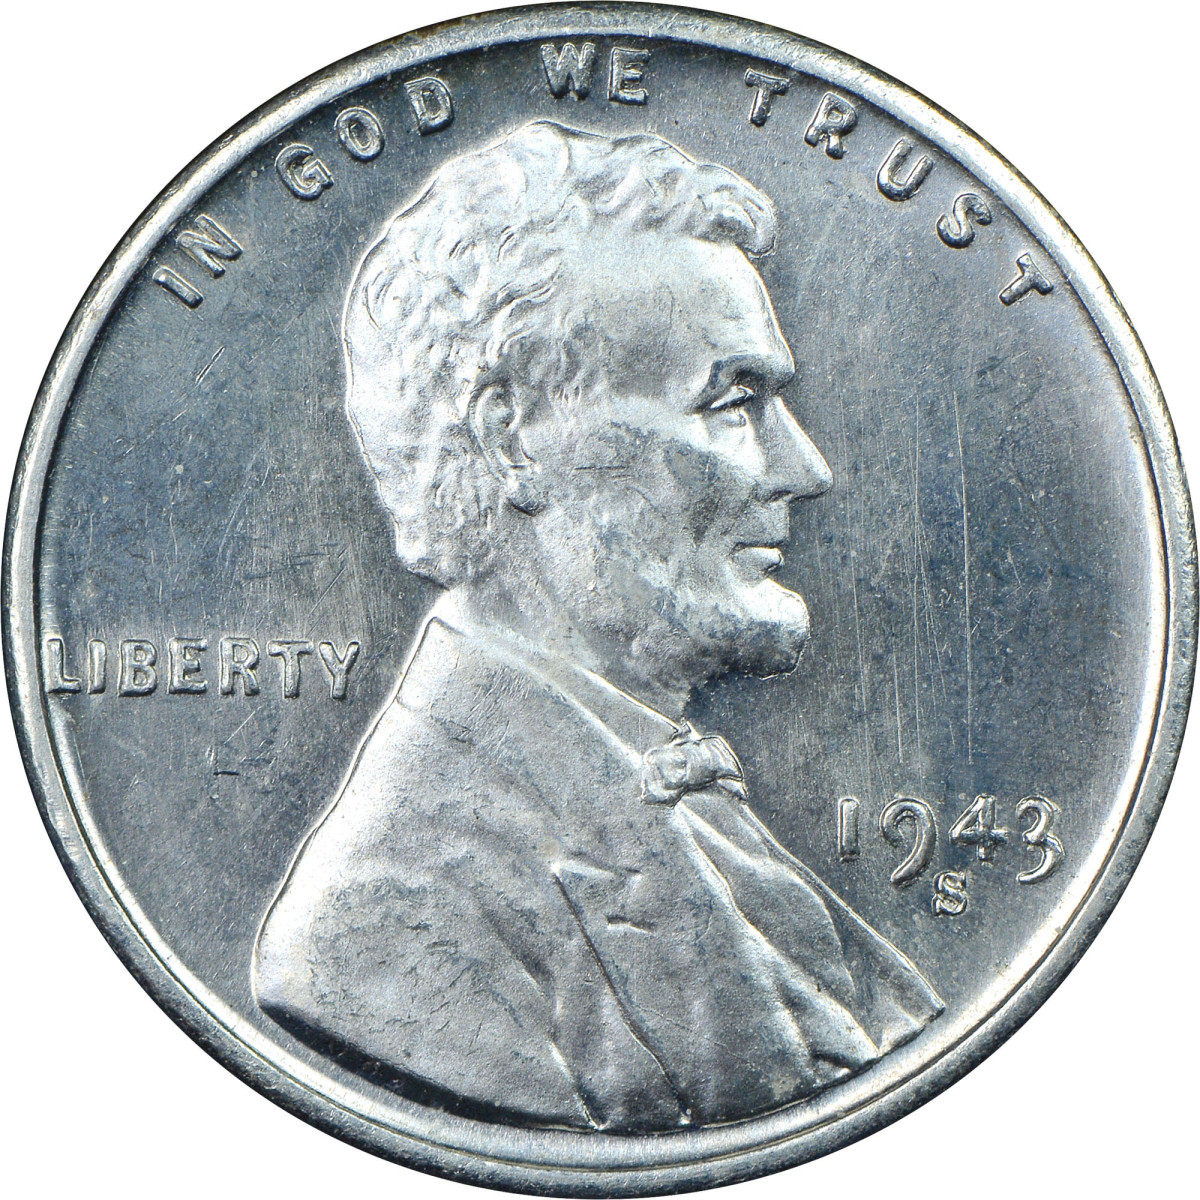 Full obverse of the 1943/42-S cent. (Image courtesy Numismatic Guaranty Company and David Lange. Used with permission.)